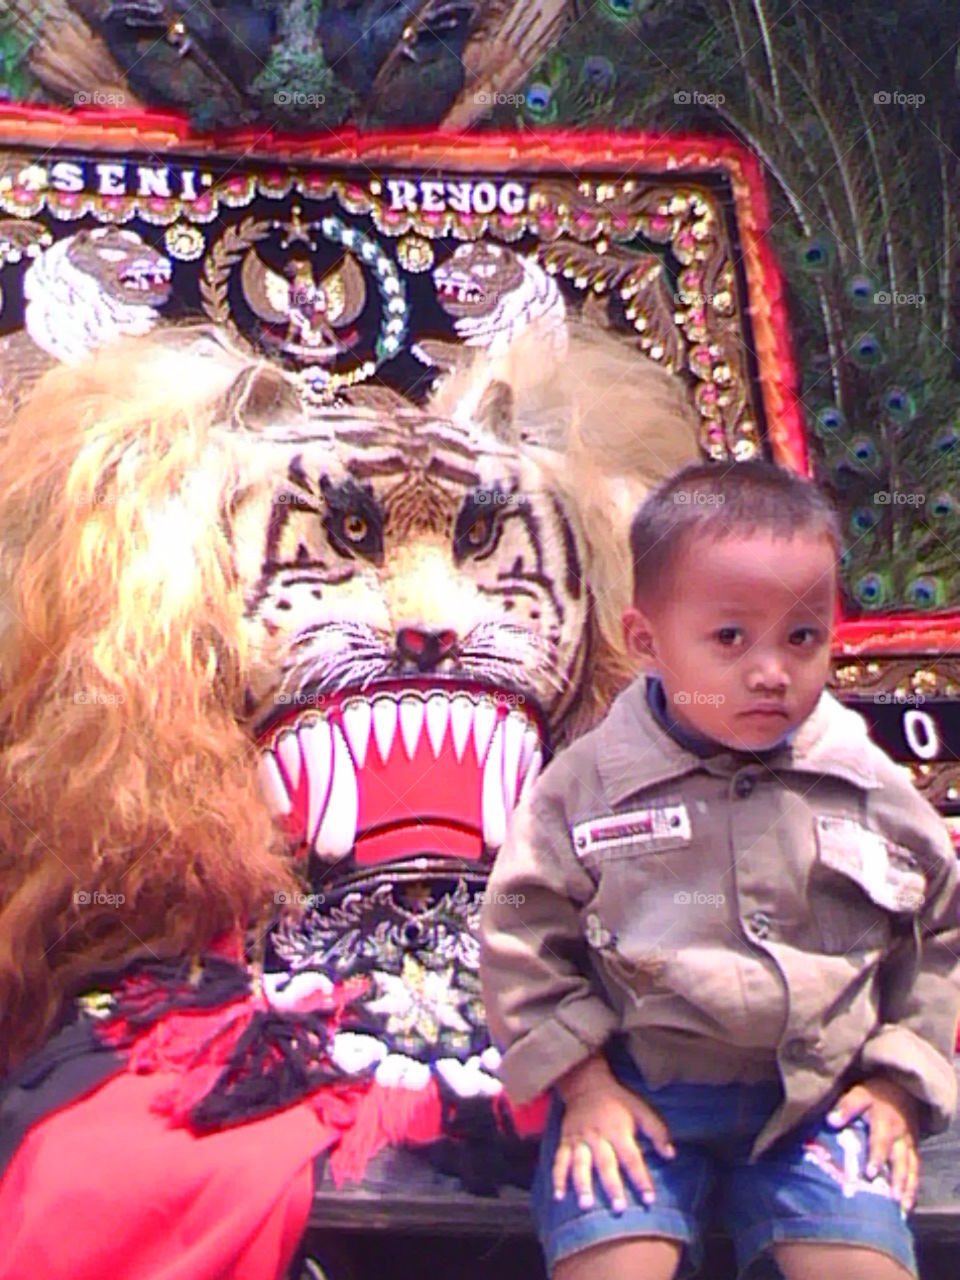 Reog Ponorogo, Indonesian anchient culture